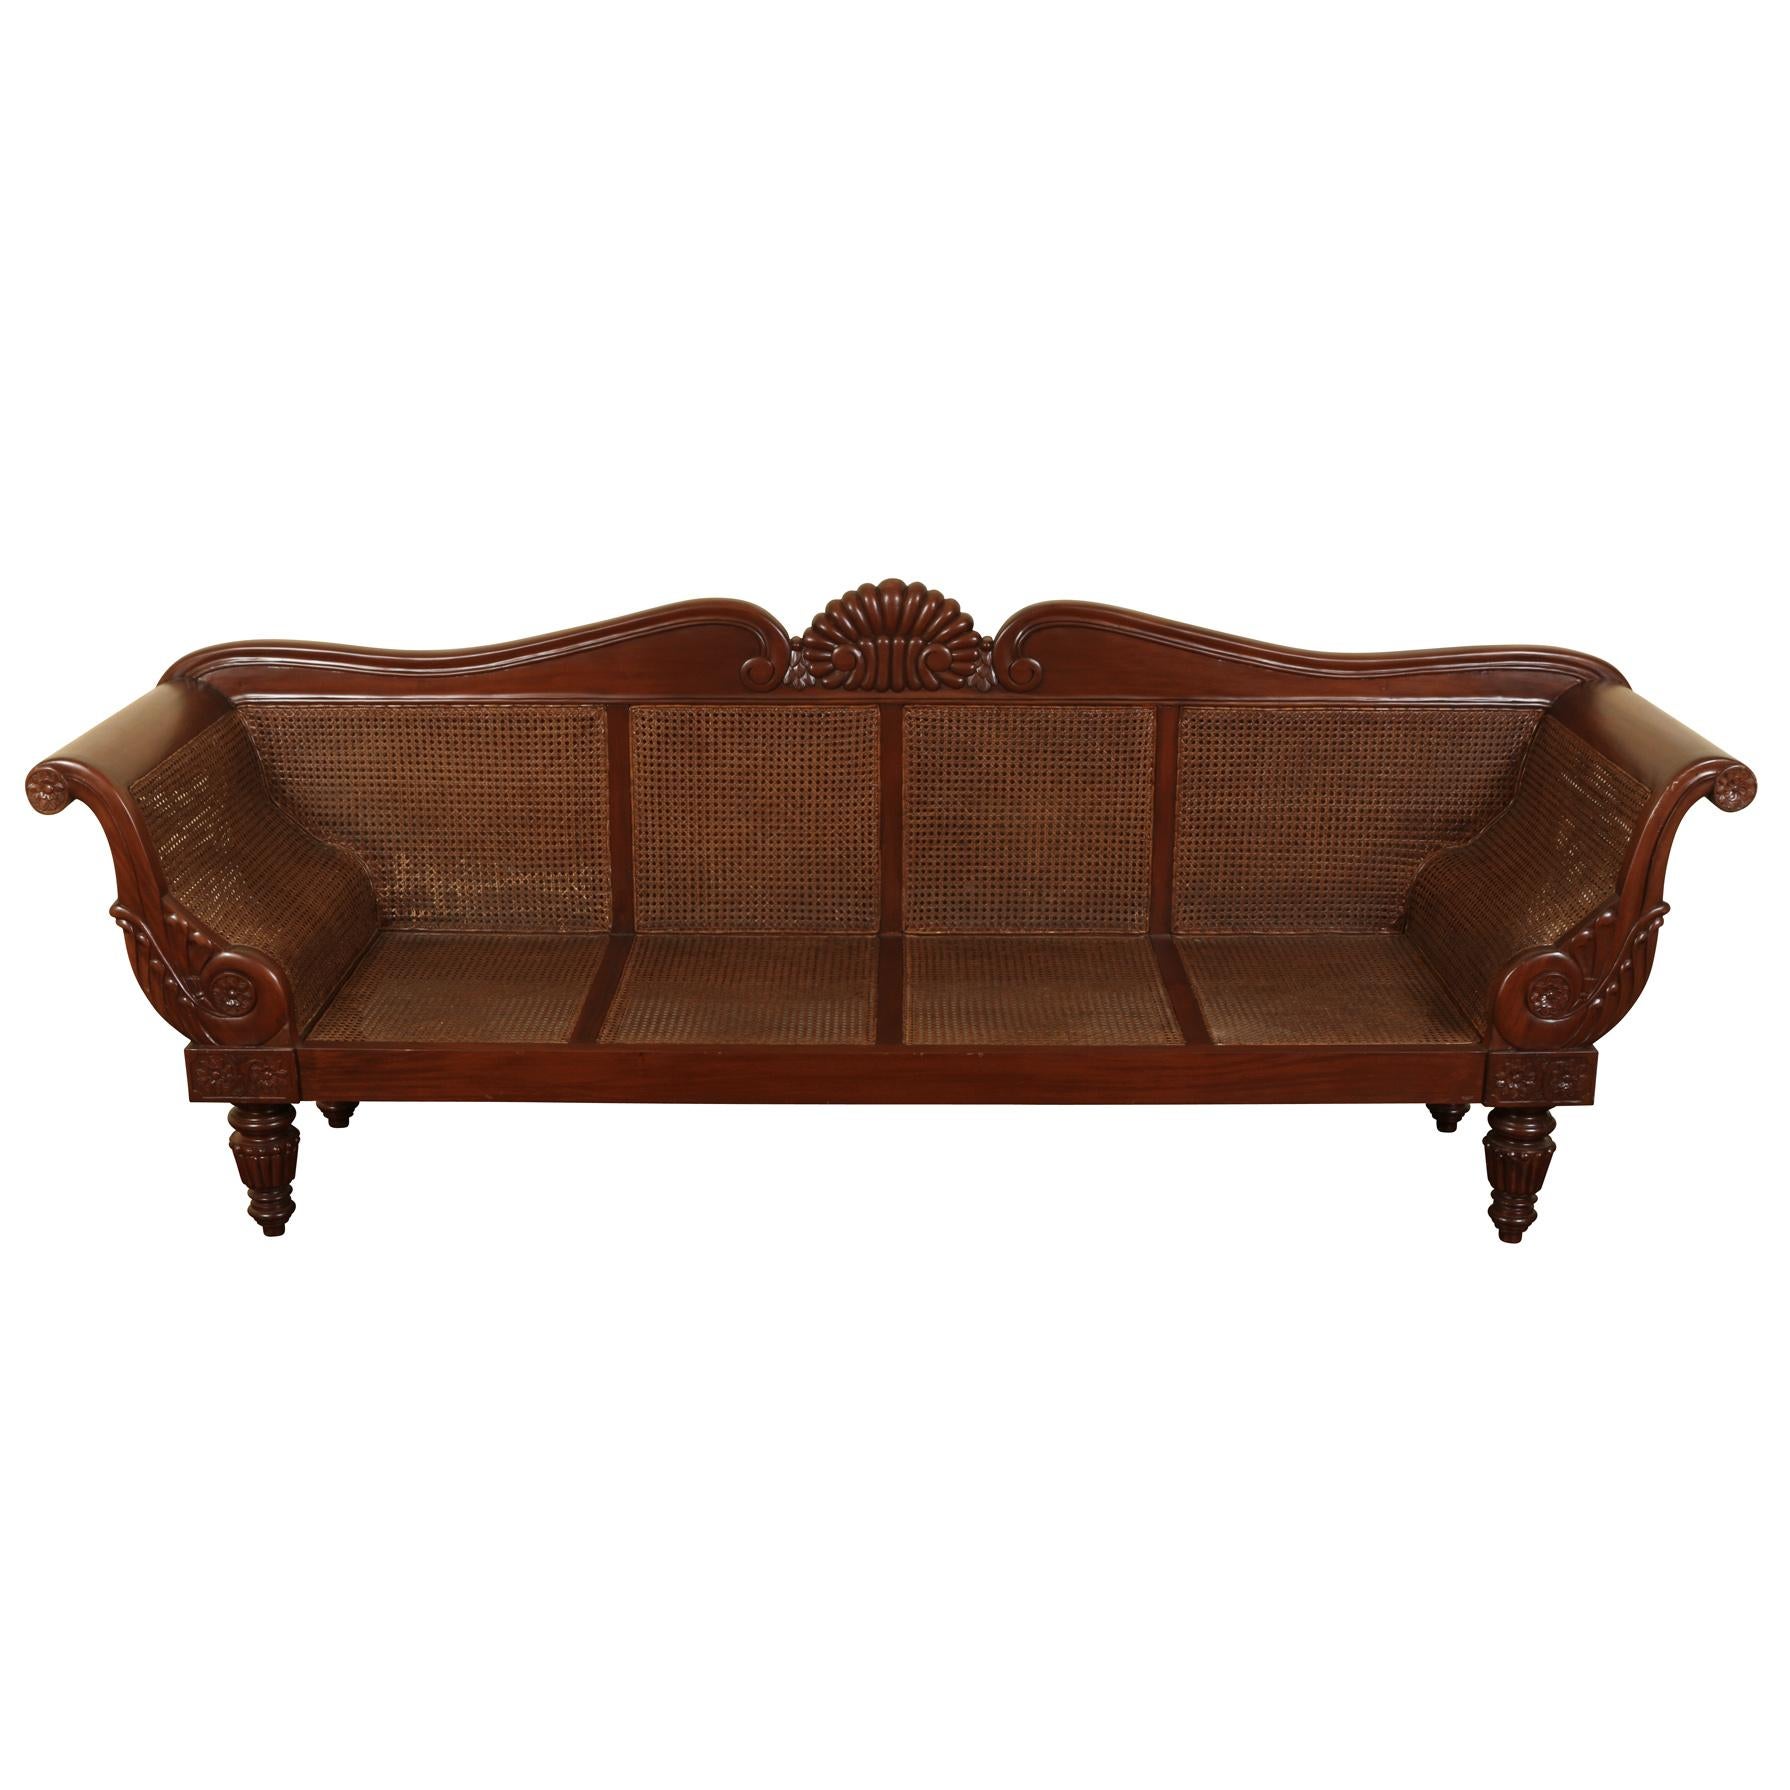 Large Anglo Indian cane and wood sofa with removable cushion on caned seat and caned back, rolled arms and curved back with shell detail.